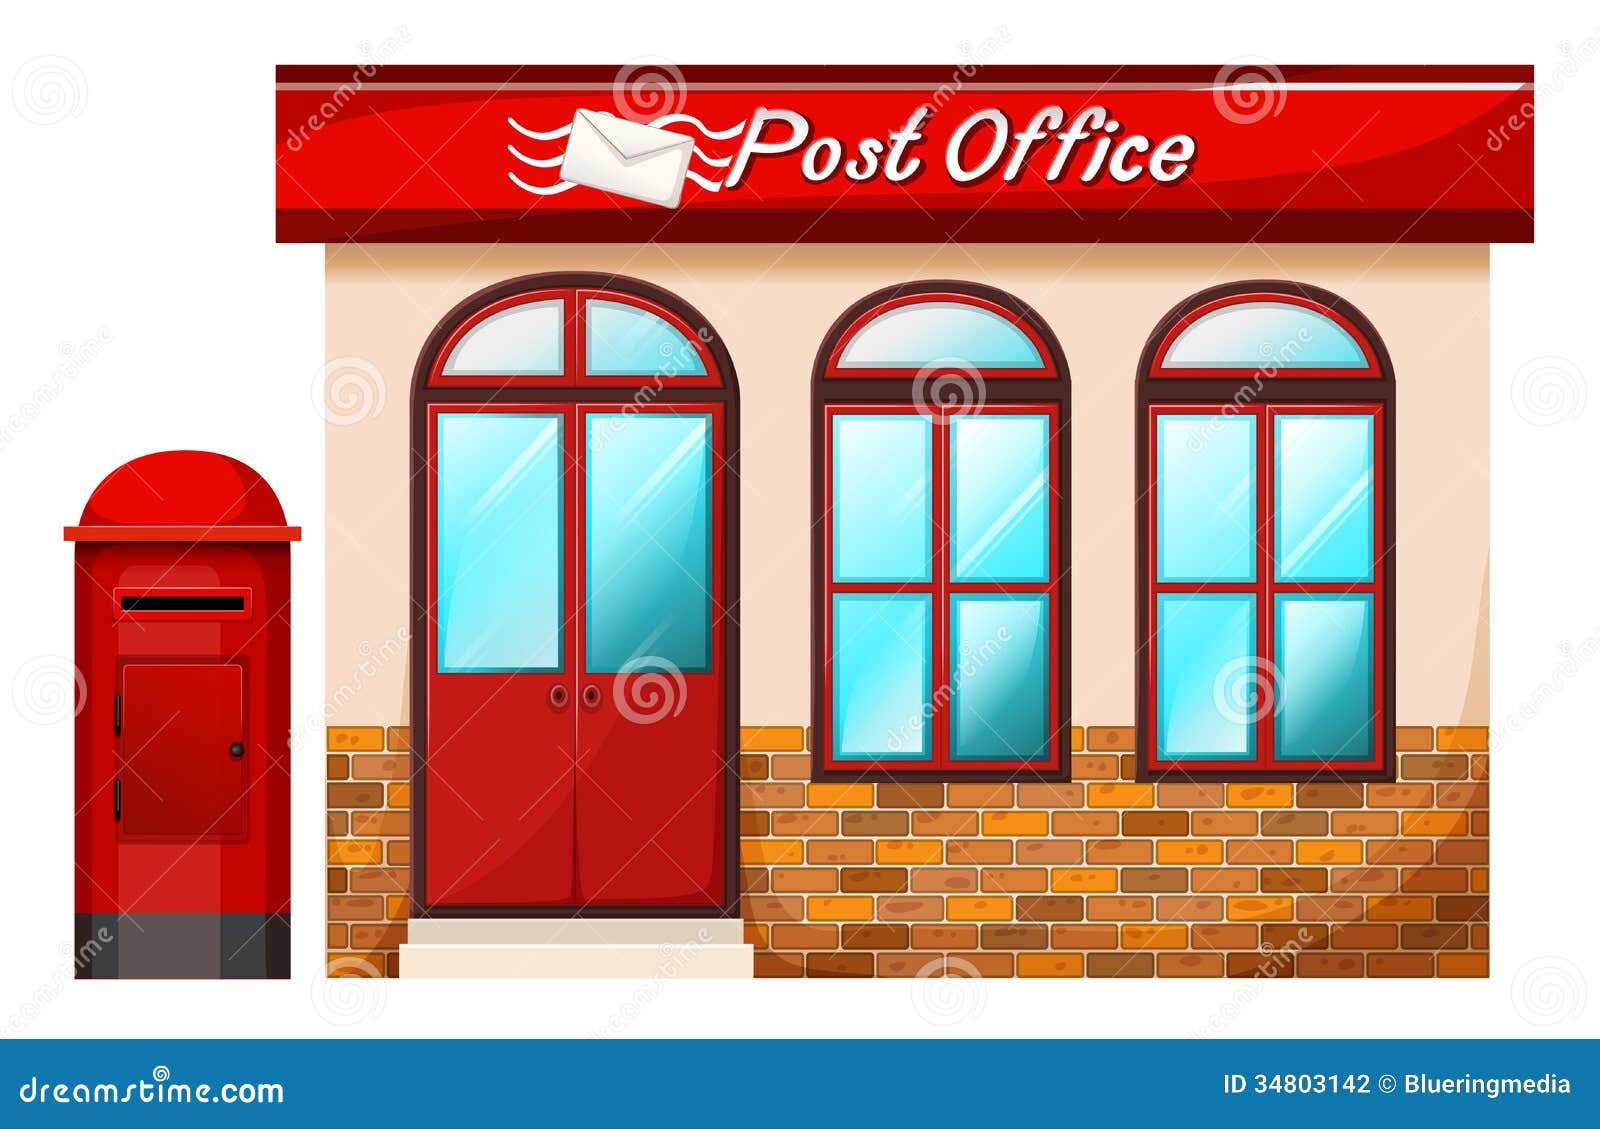 clipart post office - photo #8